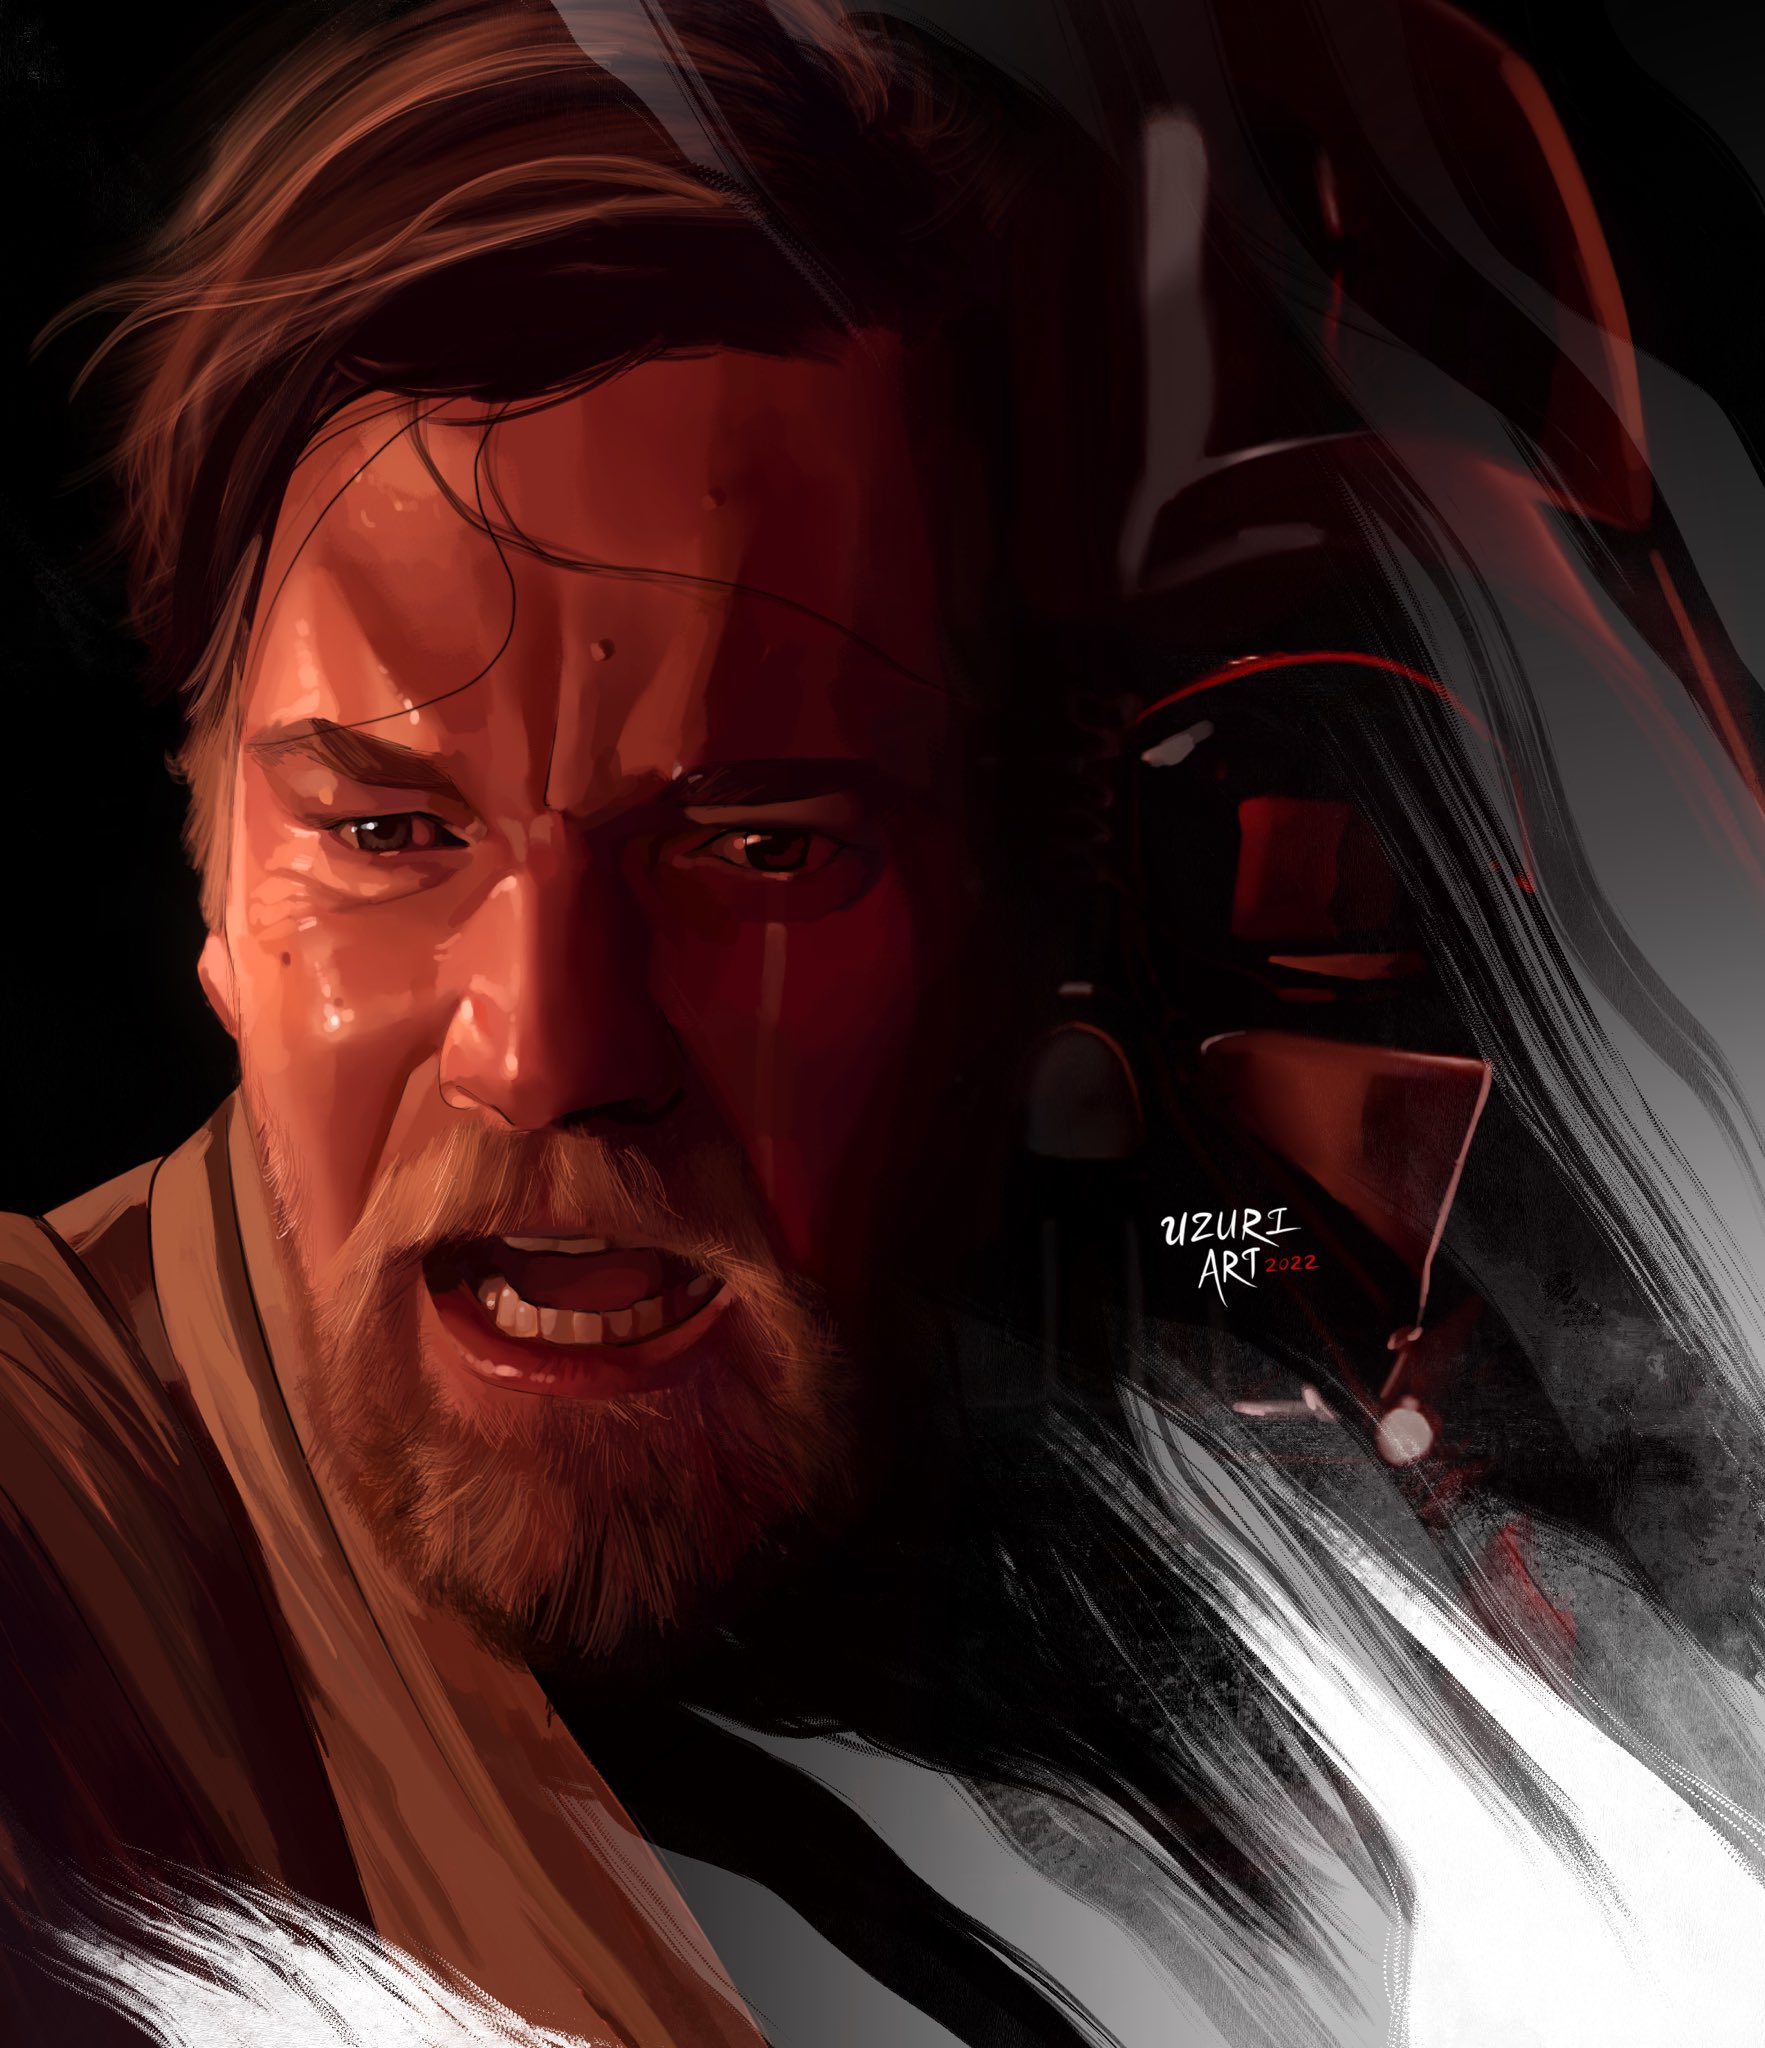 Uzuri Art on X: For this week's #StarWars What If…? I'm imagining an older  Qui-Gon Jinn with his apprentice, Anakin Skywalker. How would things have  been if Qui-Gon had trained him? #digitalart #